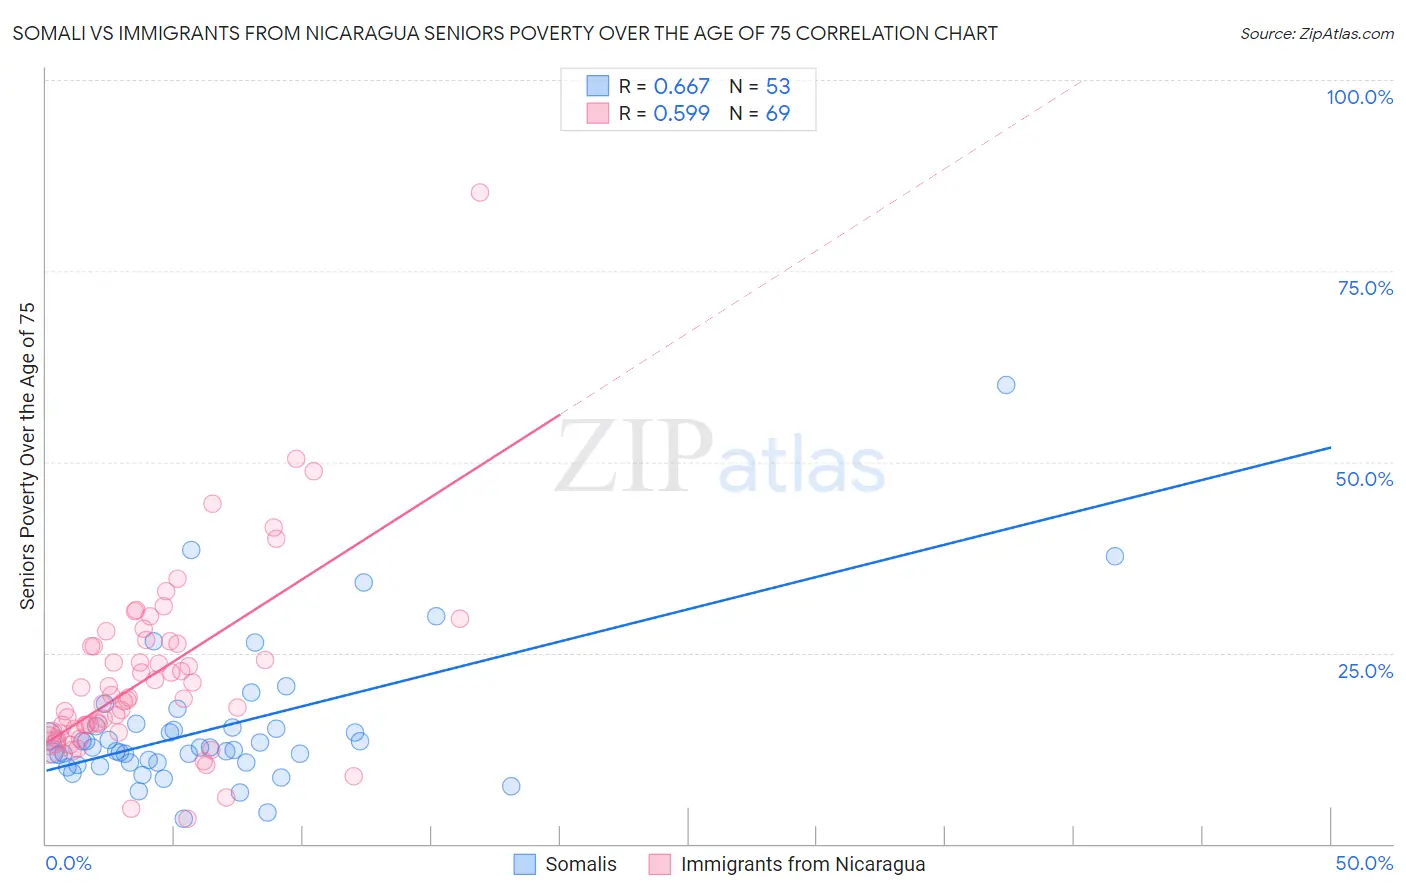 Somali vs Immigrants from Nicaragua Seniors Poverty Over the Age of 75